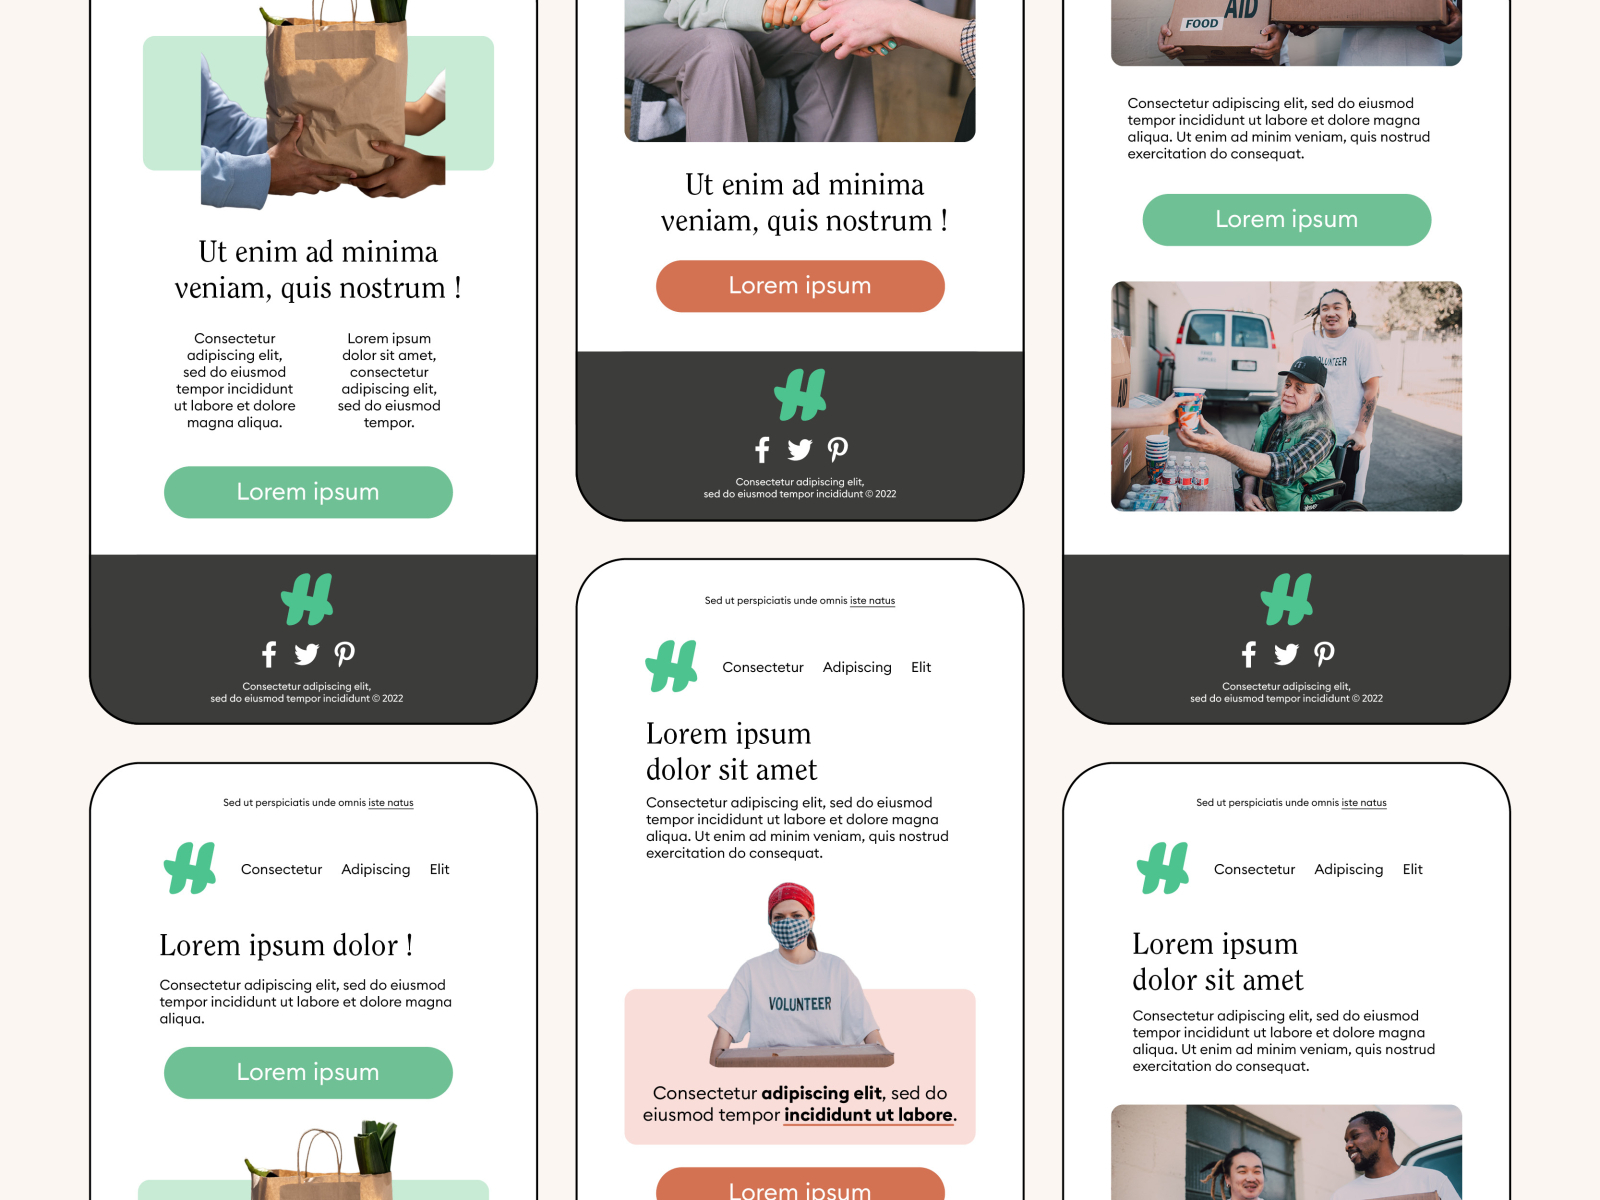 Newsletter Template Concept by Camille Aguera on Dribbble